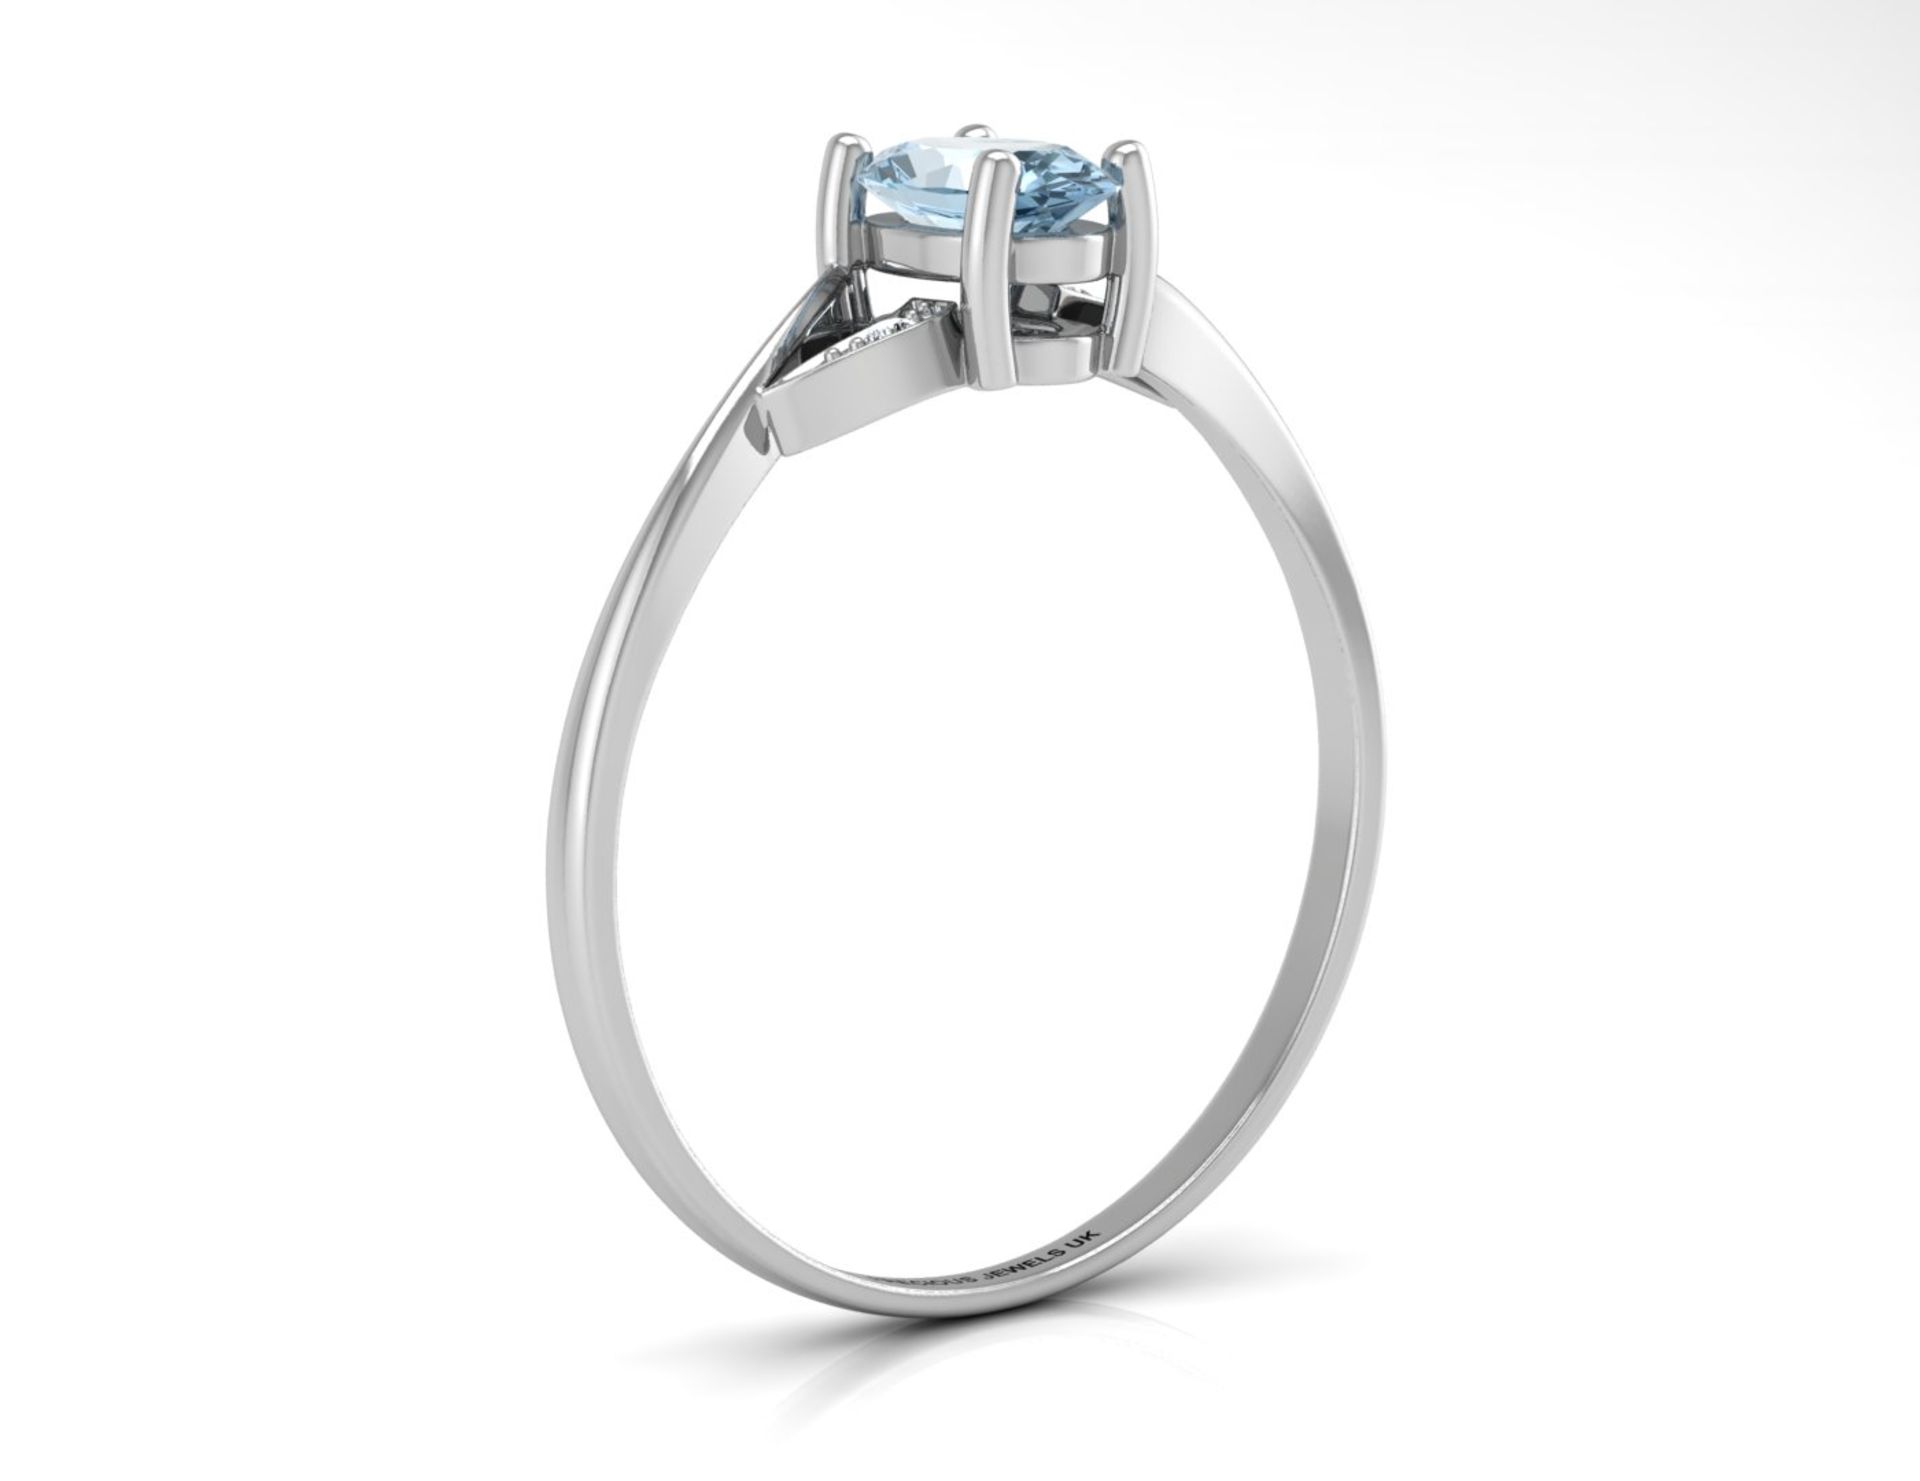 9k White Gold Diamond And Blue Topaz Ring 0.01 Carats - Image 2 of 5